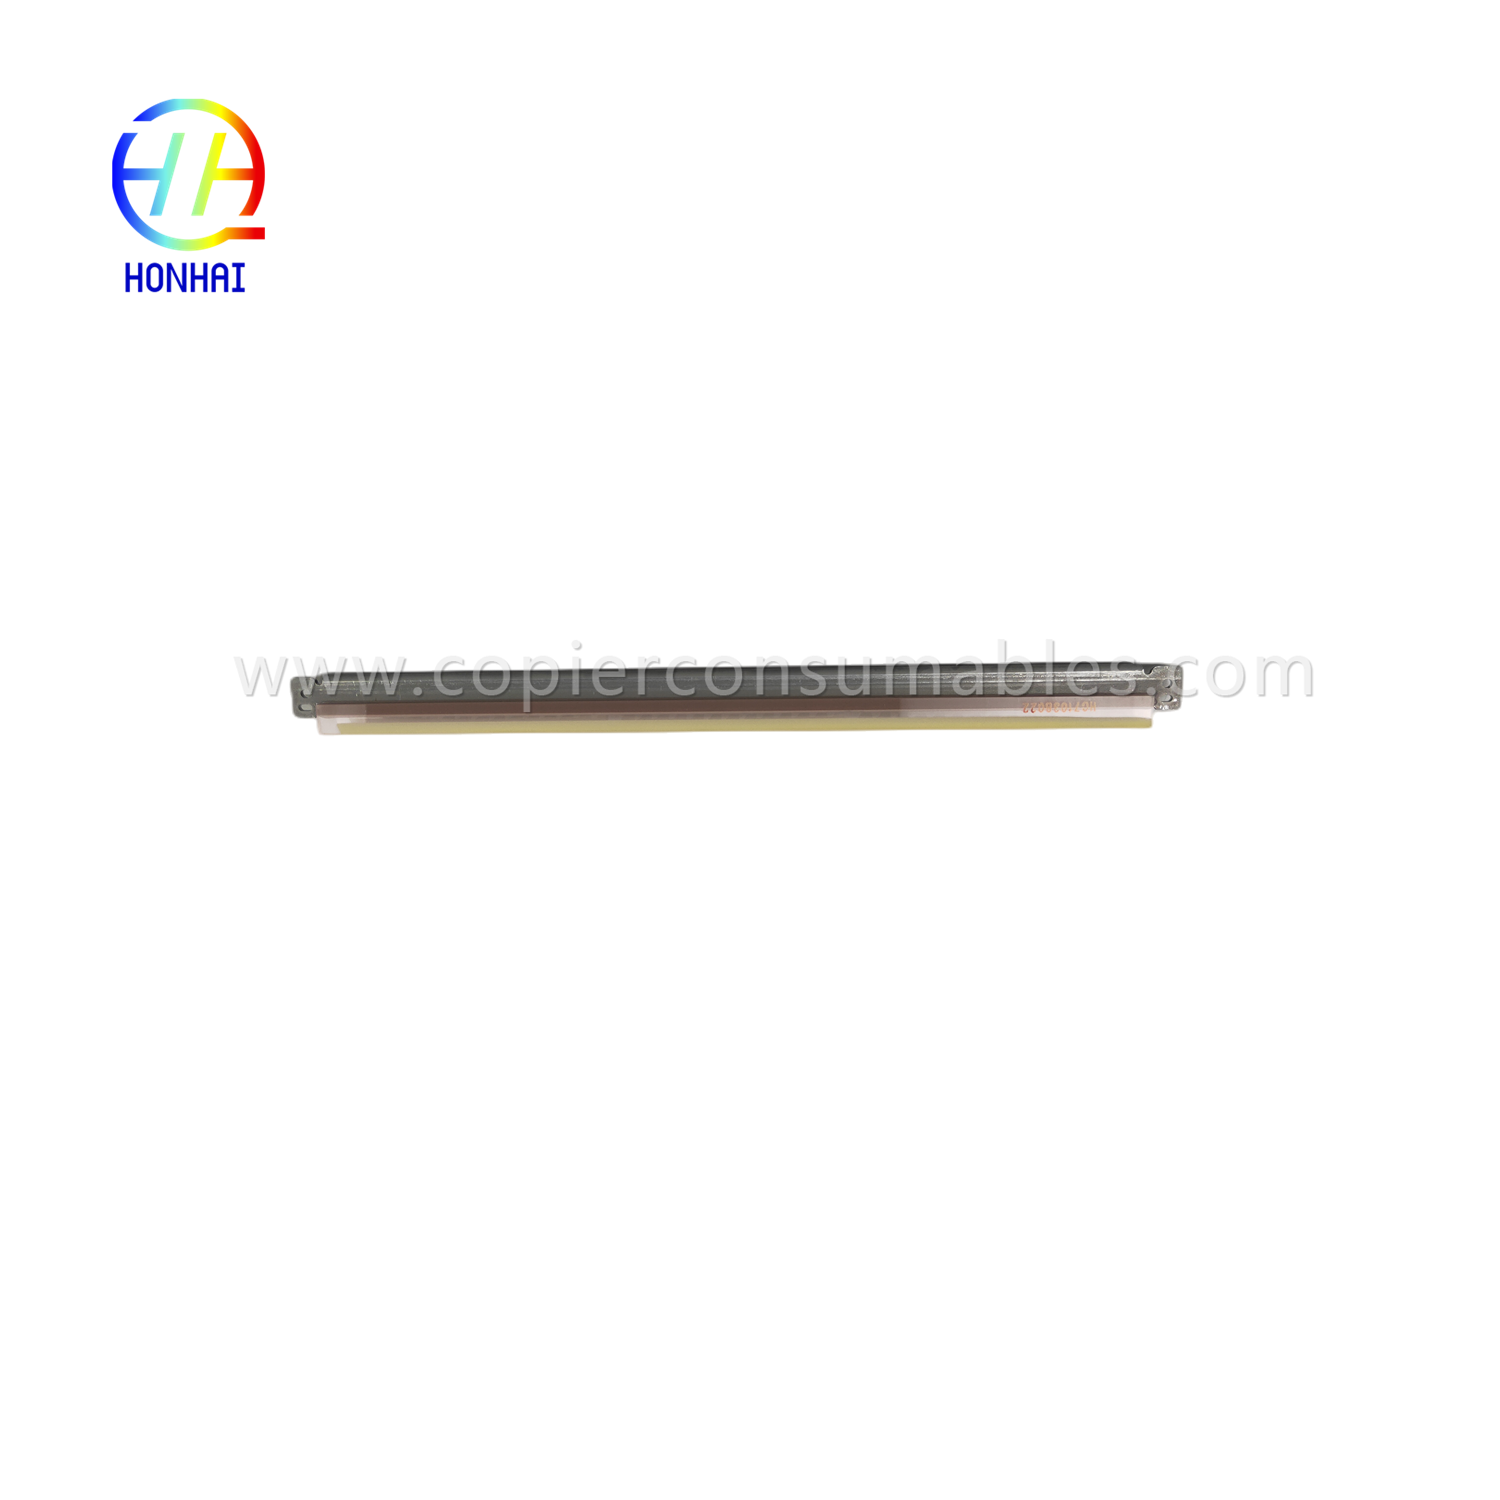 Original Drum Cleaning Blade for Xerox Workcentre 7525 7530 7535 7545 7556 7830 7835 7845 7855